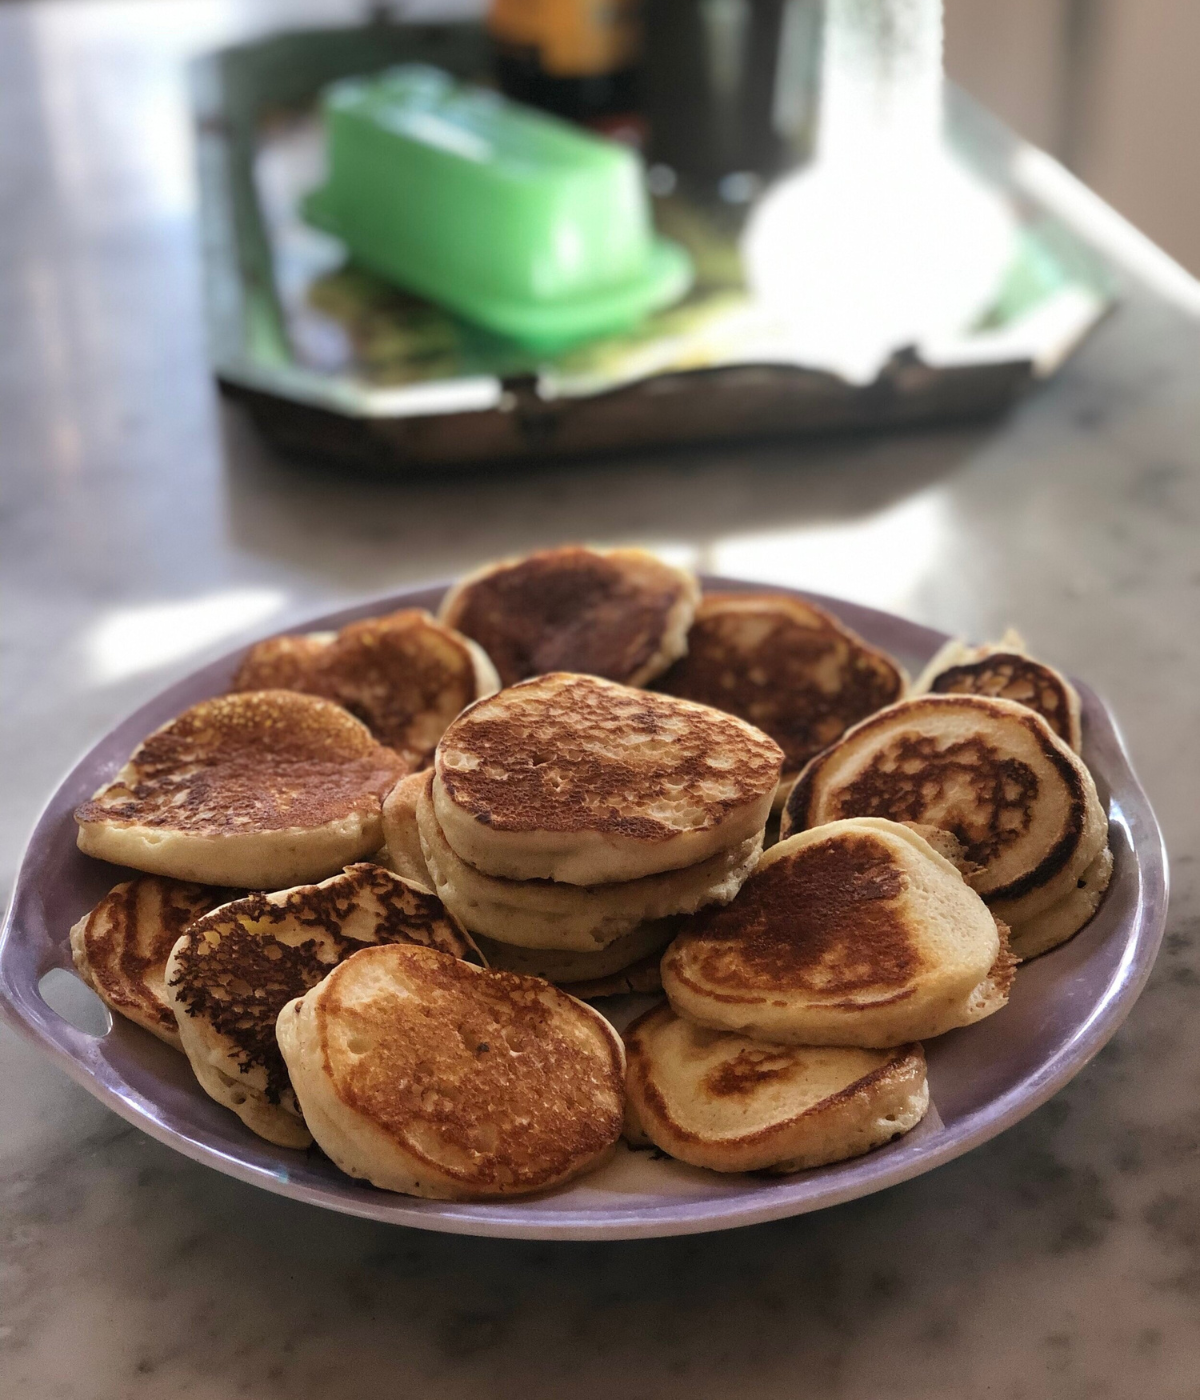 sour milk griddle cakes on a plate